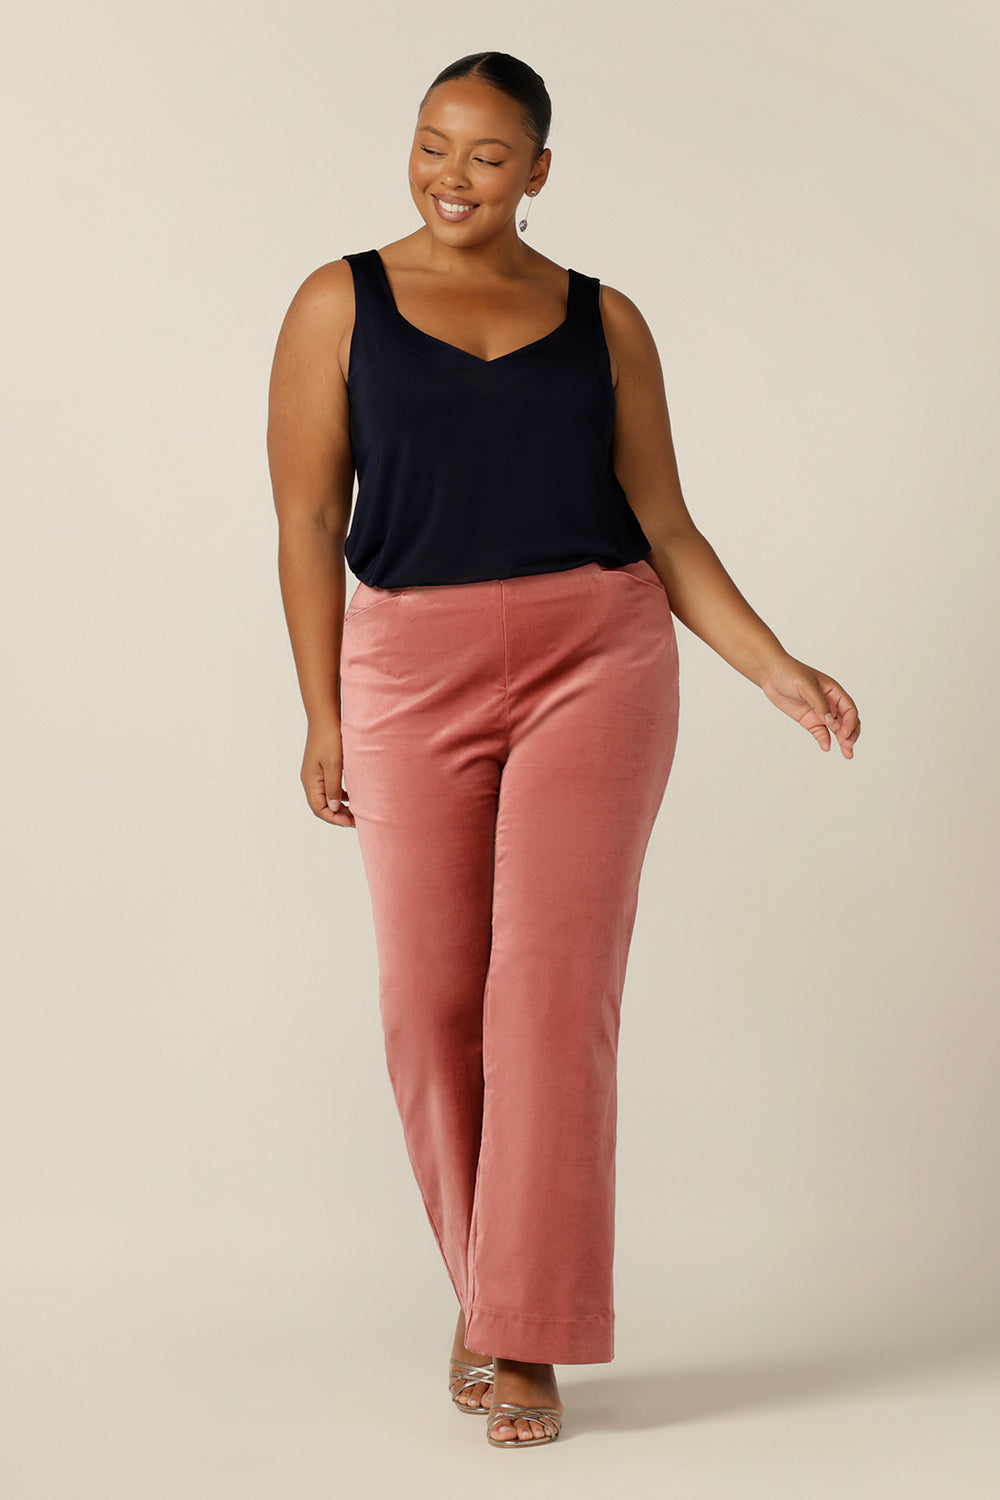 A size 18, plus size woman wears a navy cami top with wide shoulder straps together with flared velvet trousers.. Made in Australia by Australian and New Zealand women's clothing brand, L&F, this slinky jersey top wears well with evening and occasionwear skirts, pants and suit jackets.